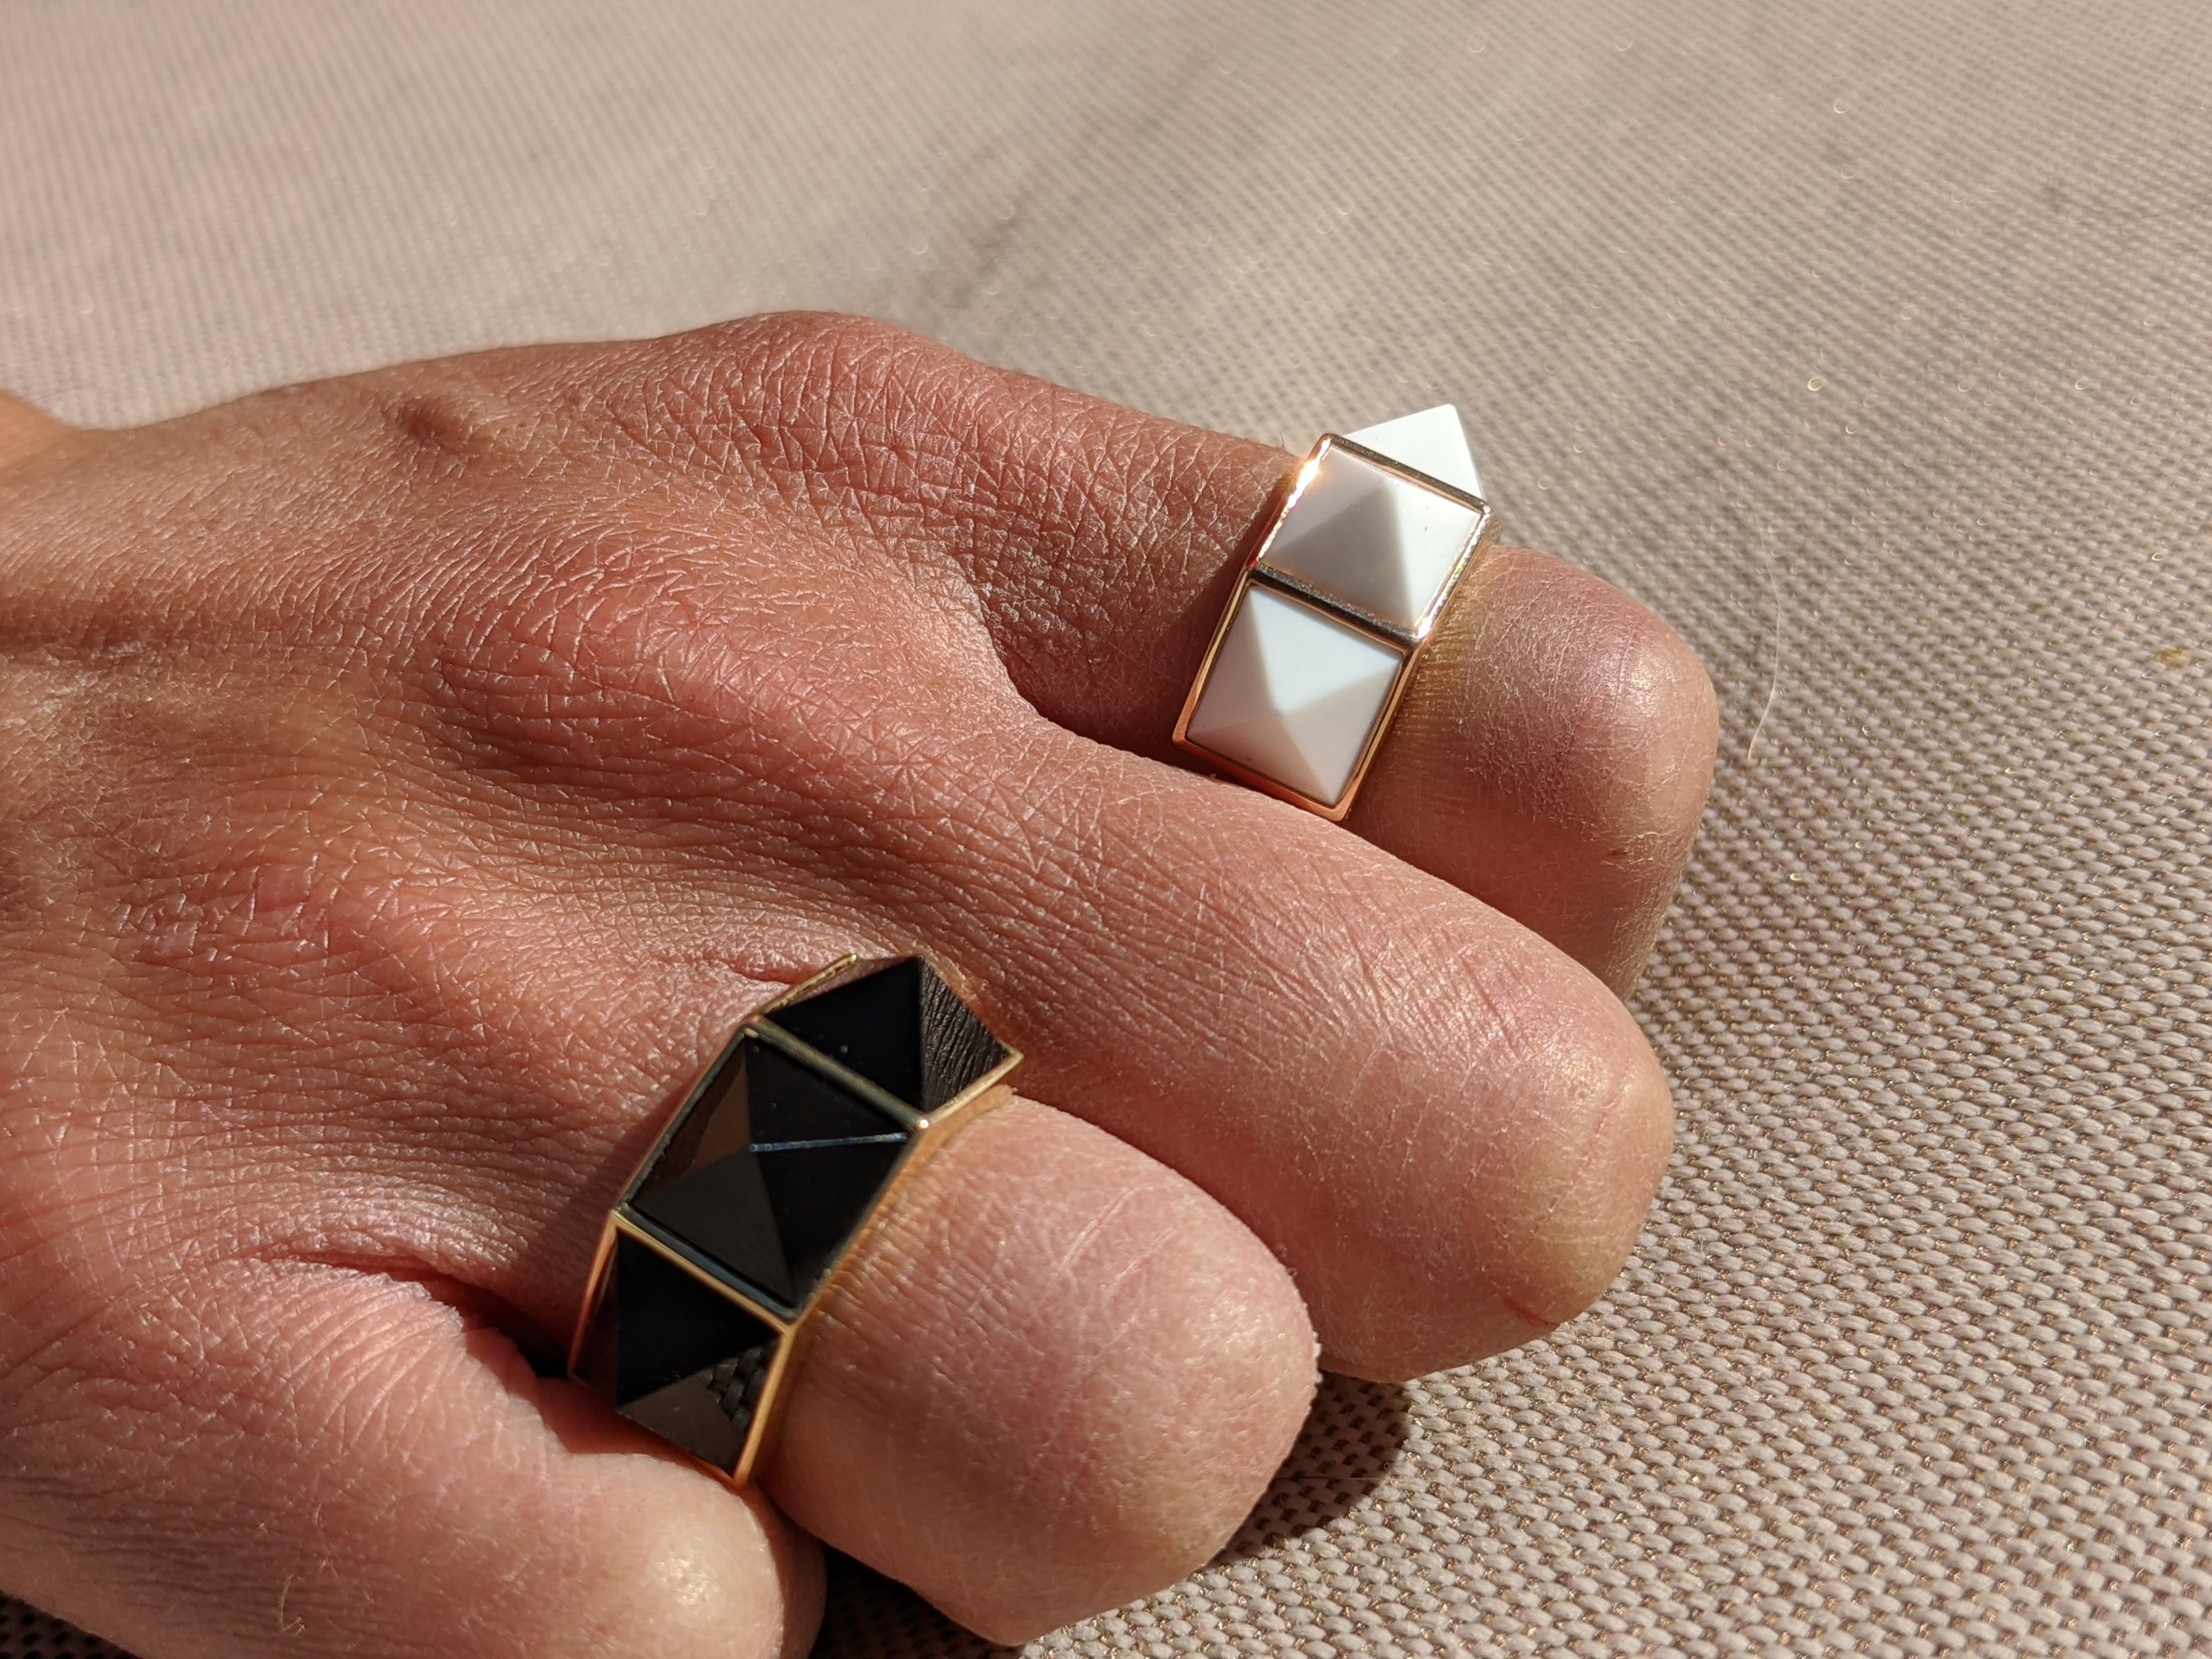 From FERRUCCI Pyramid collection, the Three Pyramids Black Onyx ring in 18k yellow gold, manufactured in New York.

Onyx is believed to offer personal protection and relationship harmony and The Pyramid symbolizes bigger consciousness of strength